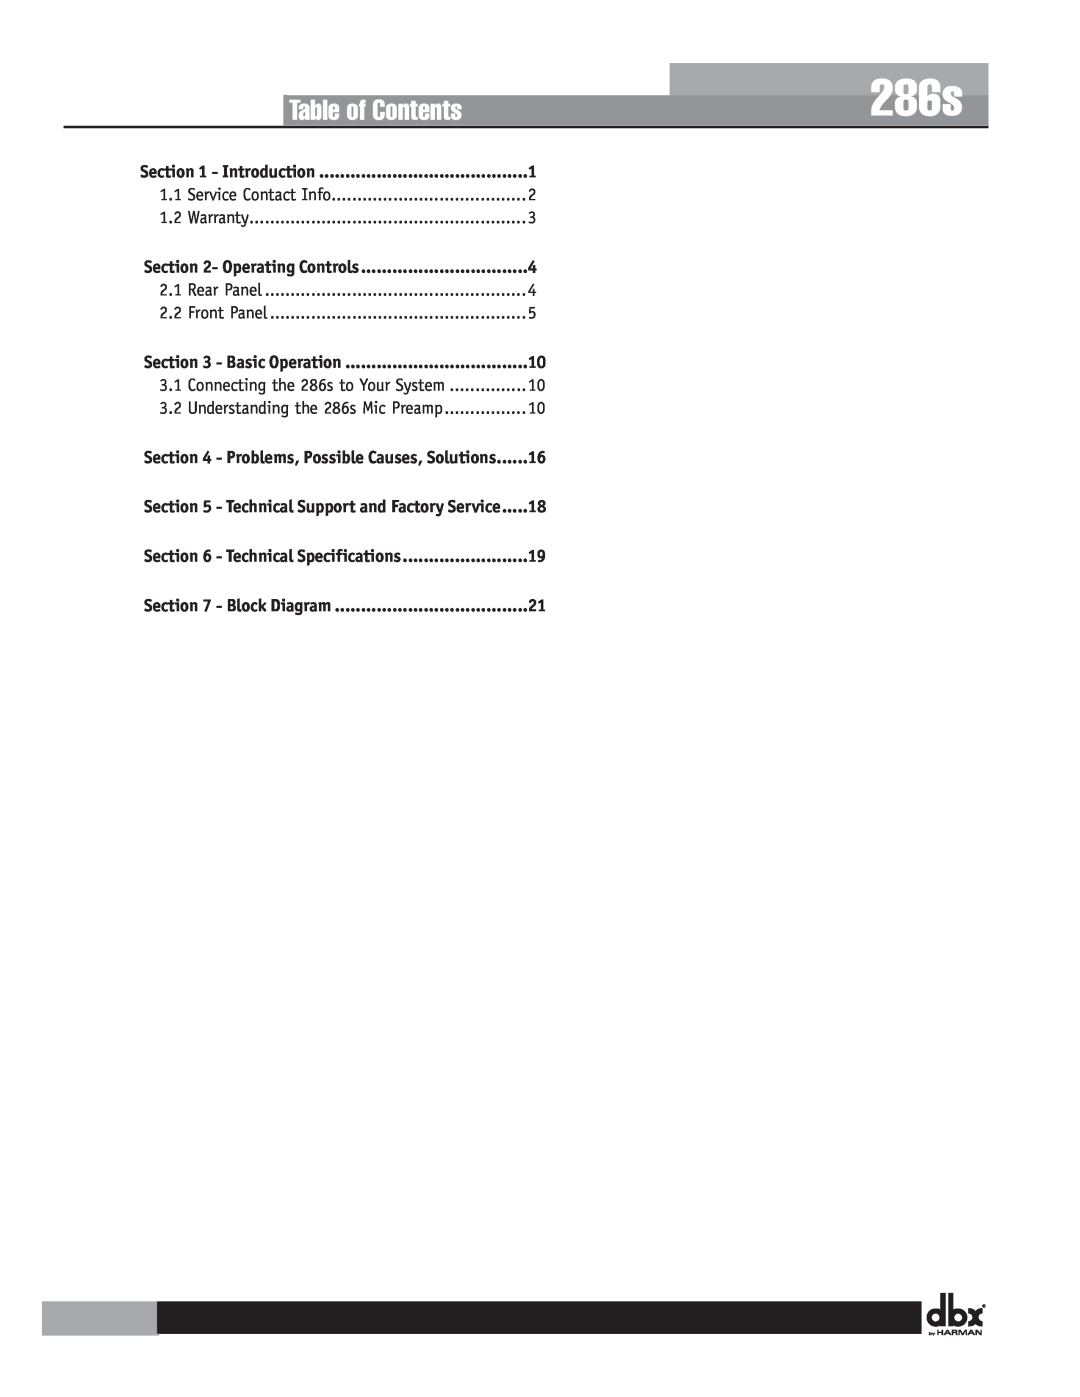 Harman user manual 286s, Table of Contents 